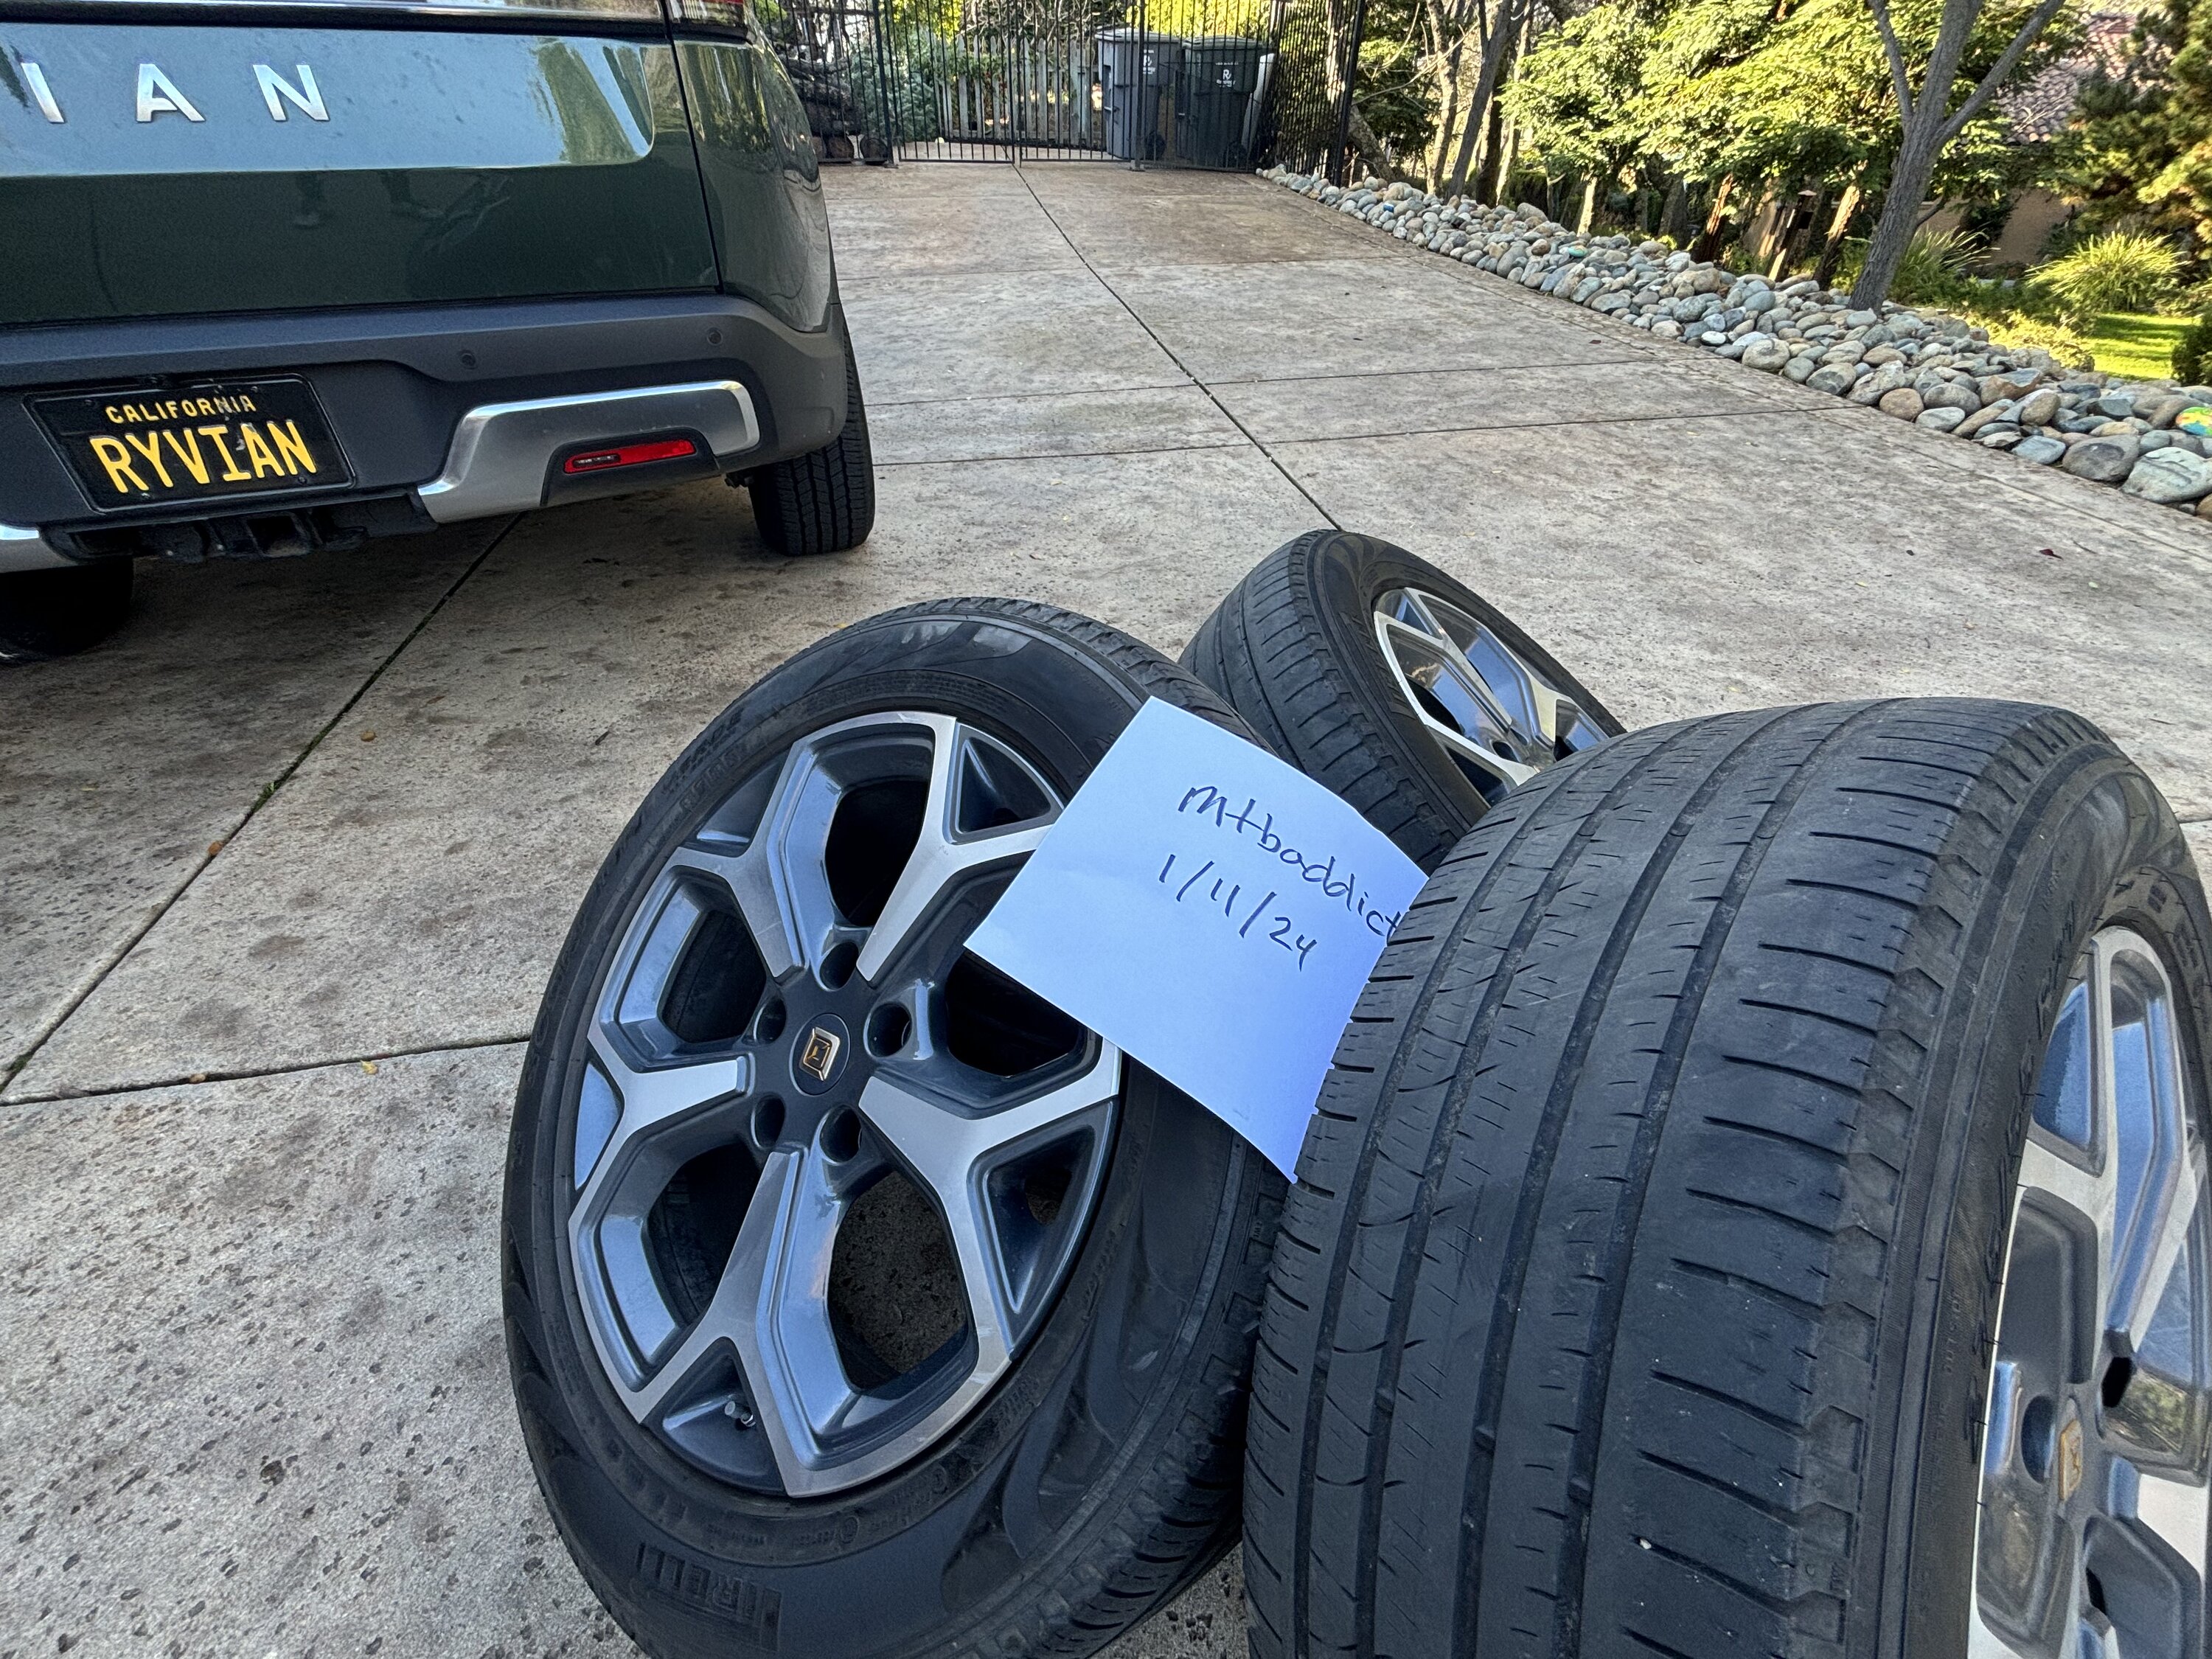 Rivian R1T R1S 3 individual 21” wheels and tires for spares $250 each - Sacramento and Foothills Area IMG_5701